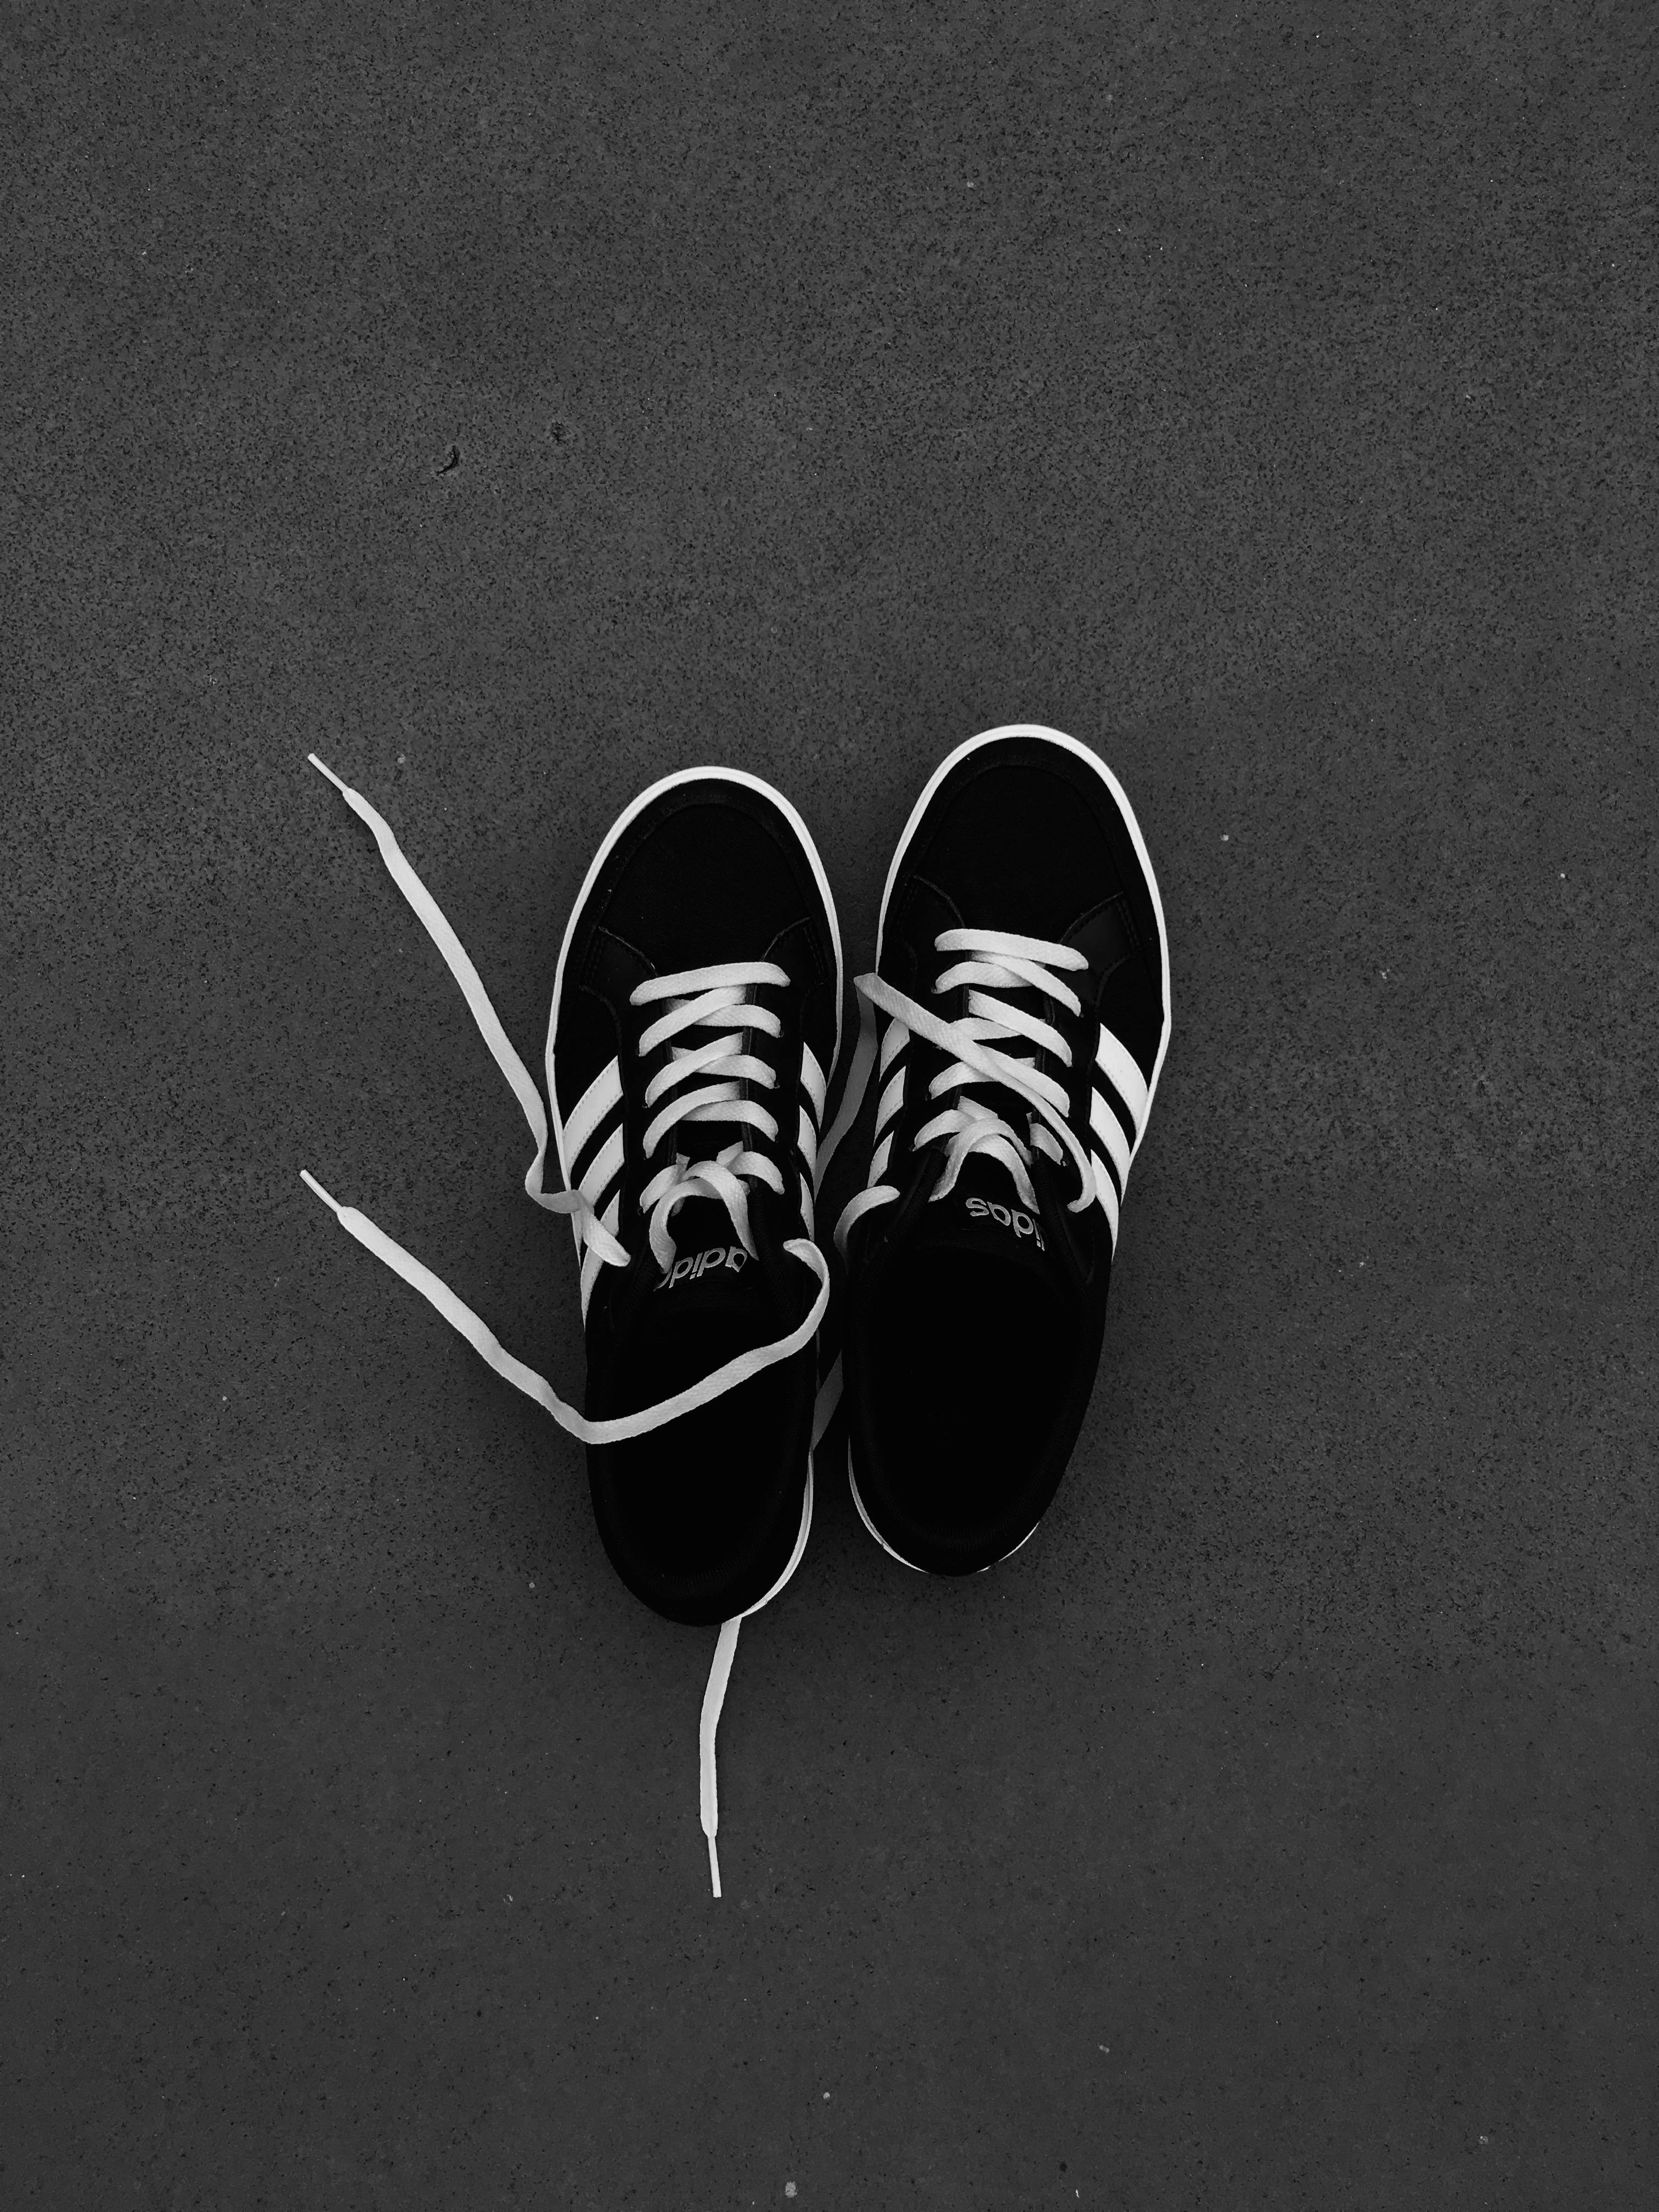 Pair of Black-and-white Adidas Sneakers on Grey Floor · Free Stock Photo